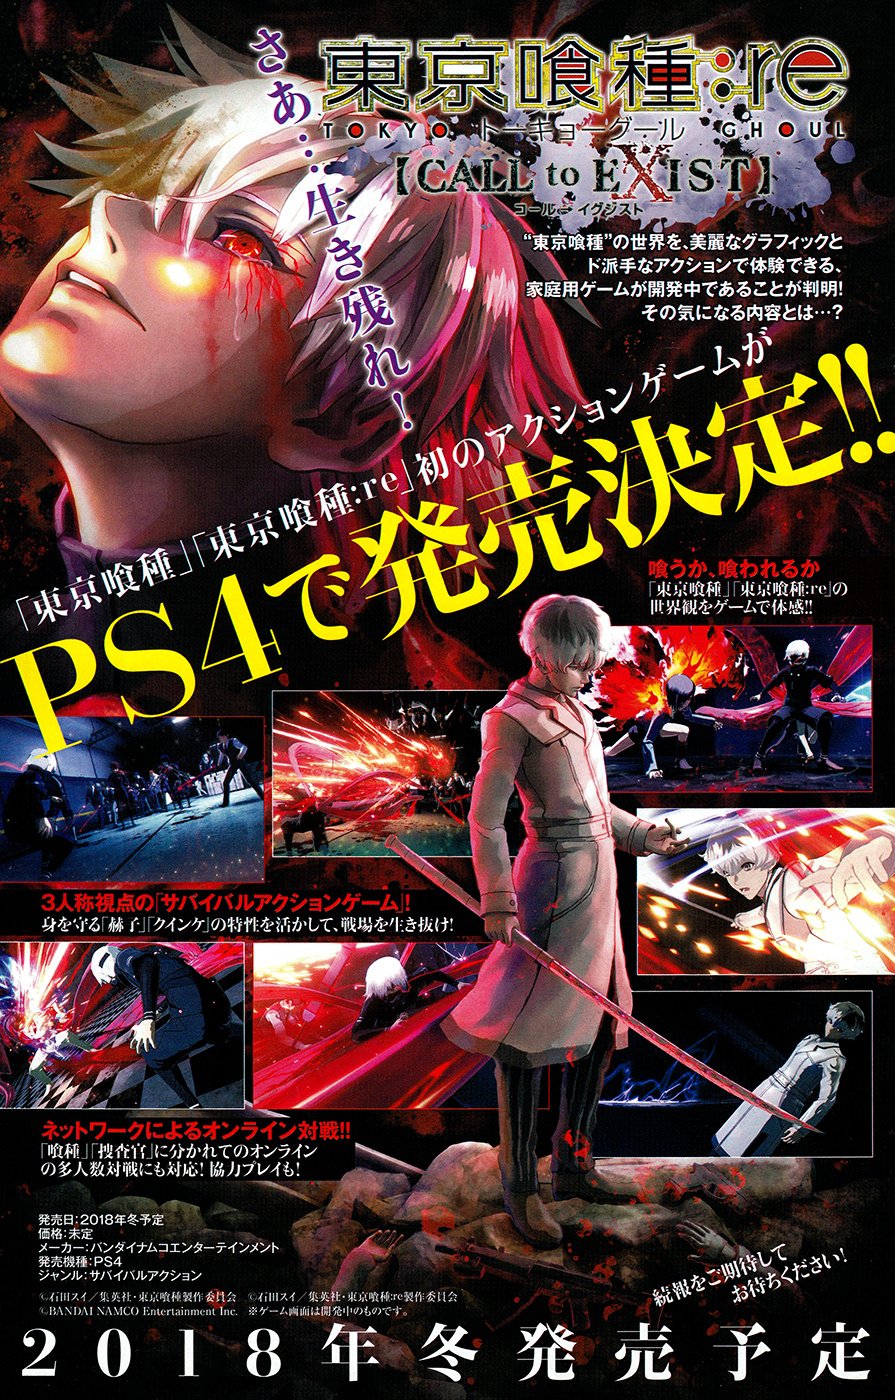 Tokyo Ghoul:re Call to Exist PS4 action game announced for